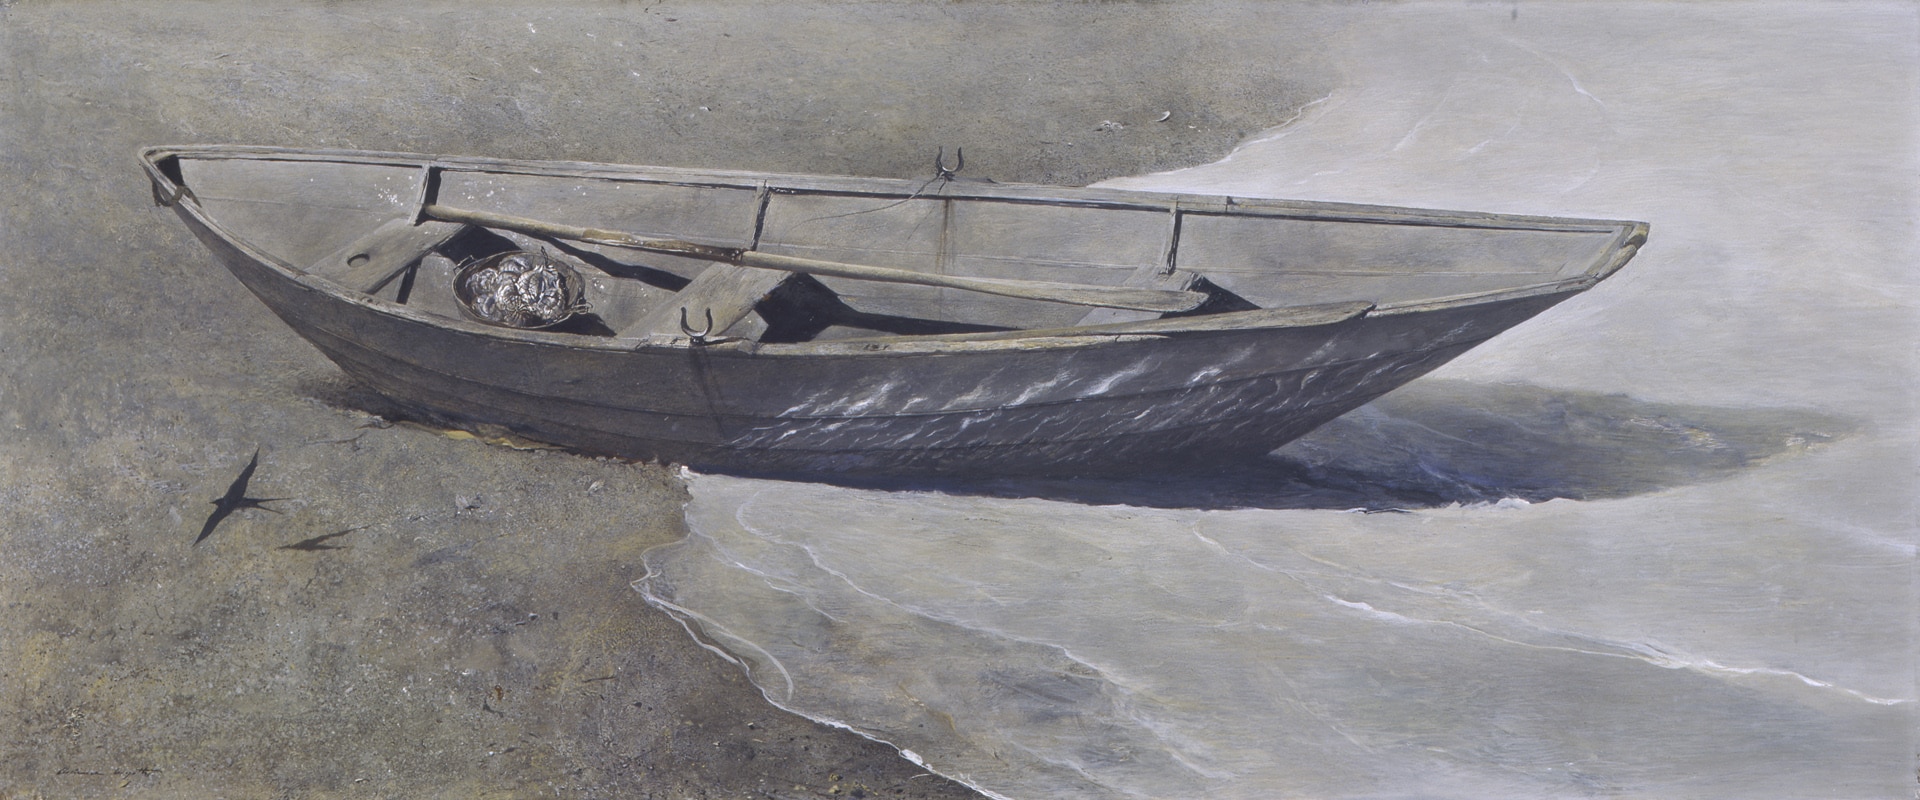 a painting of an empty rowboat half on the beach half in the water